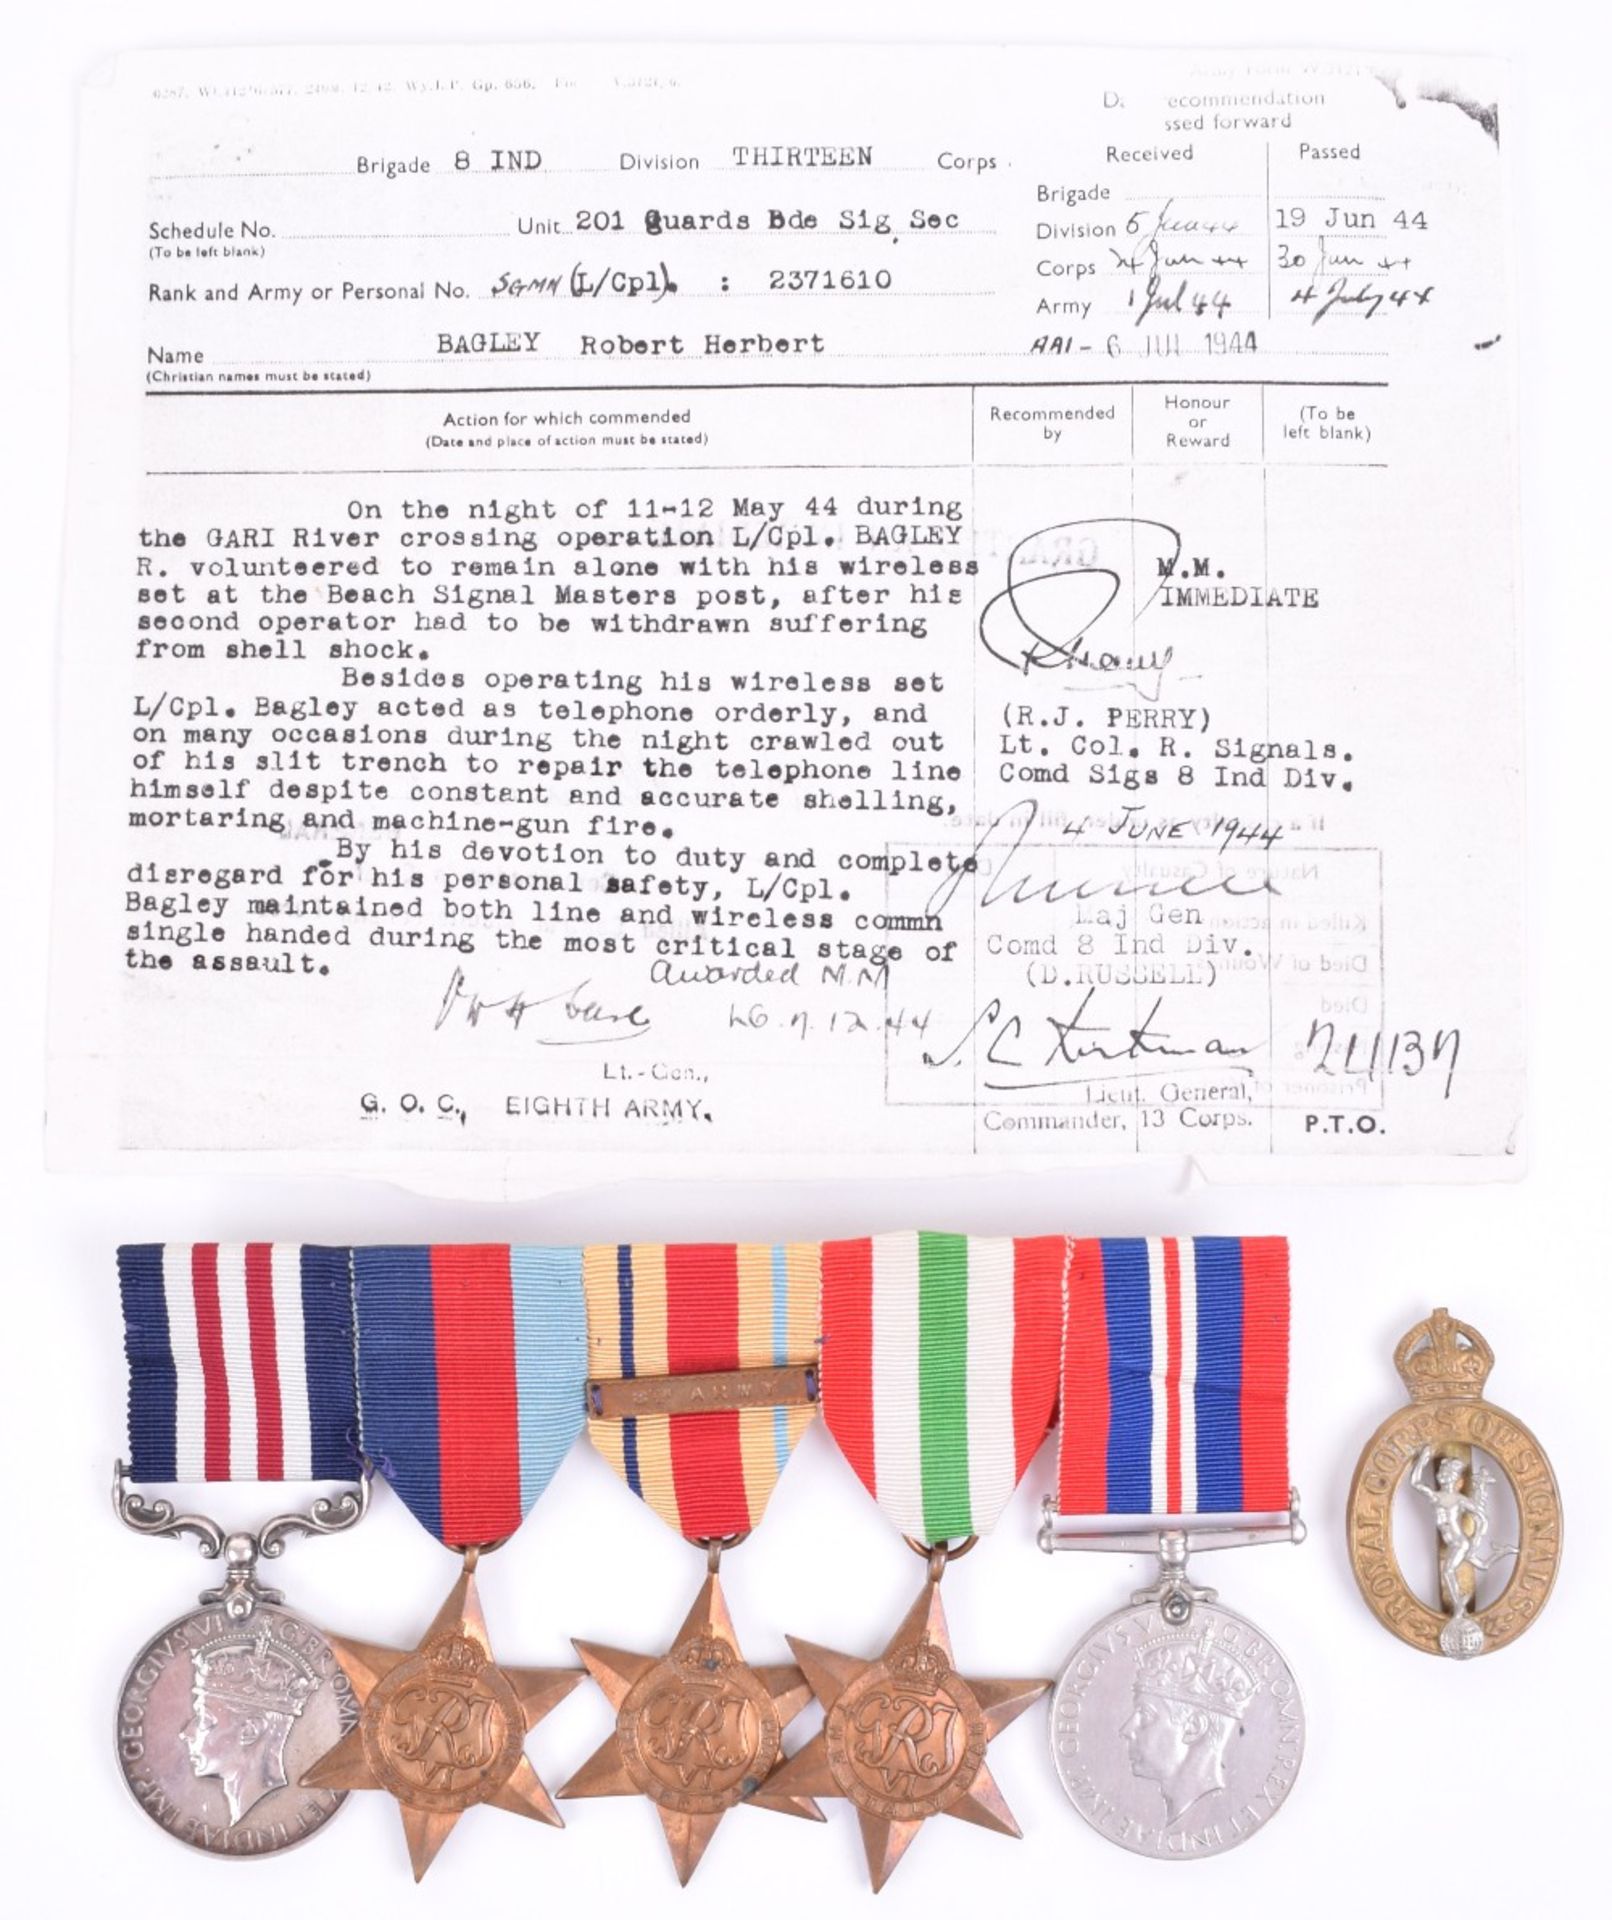 WW2 River Gari (Rapido) Crossing 1944 Immediate Military Medal (M.M) Group of Five of Lance Corporal - Image 2 of 5